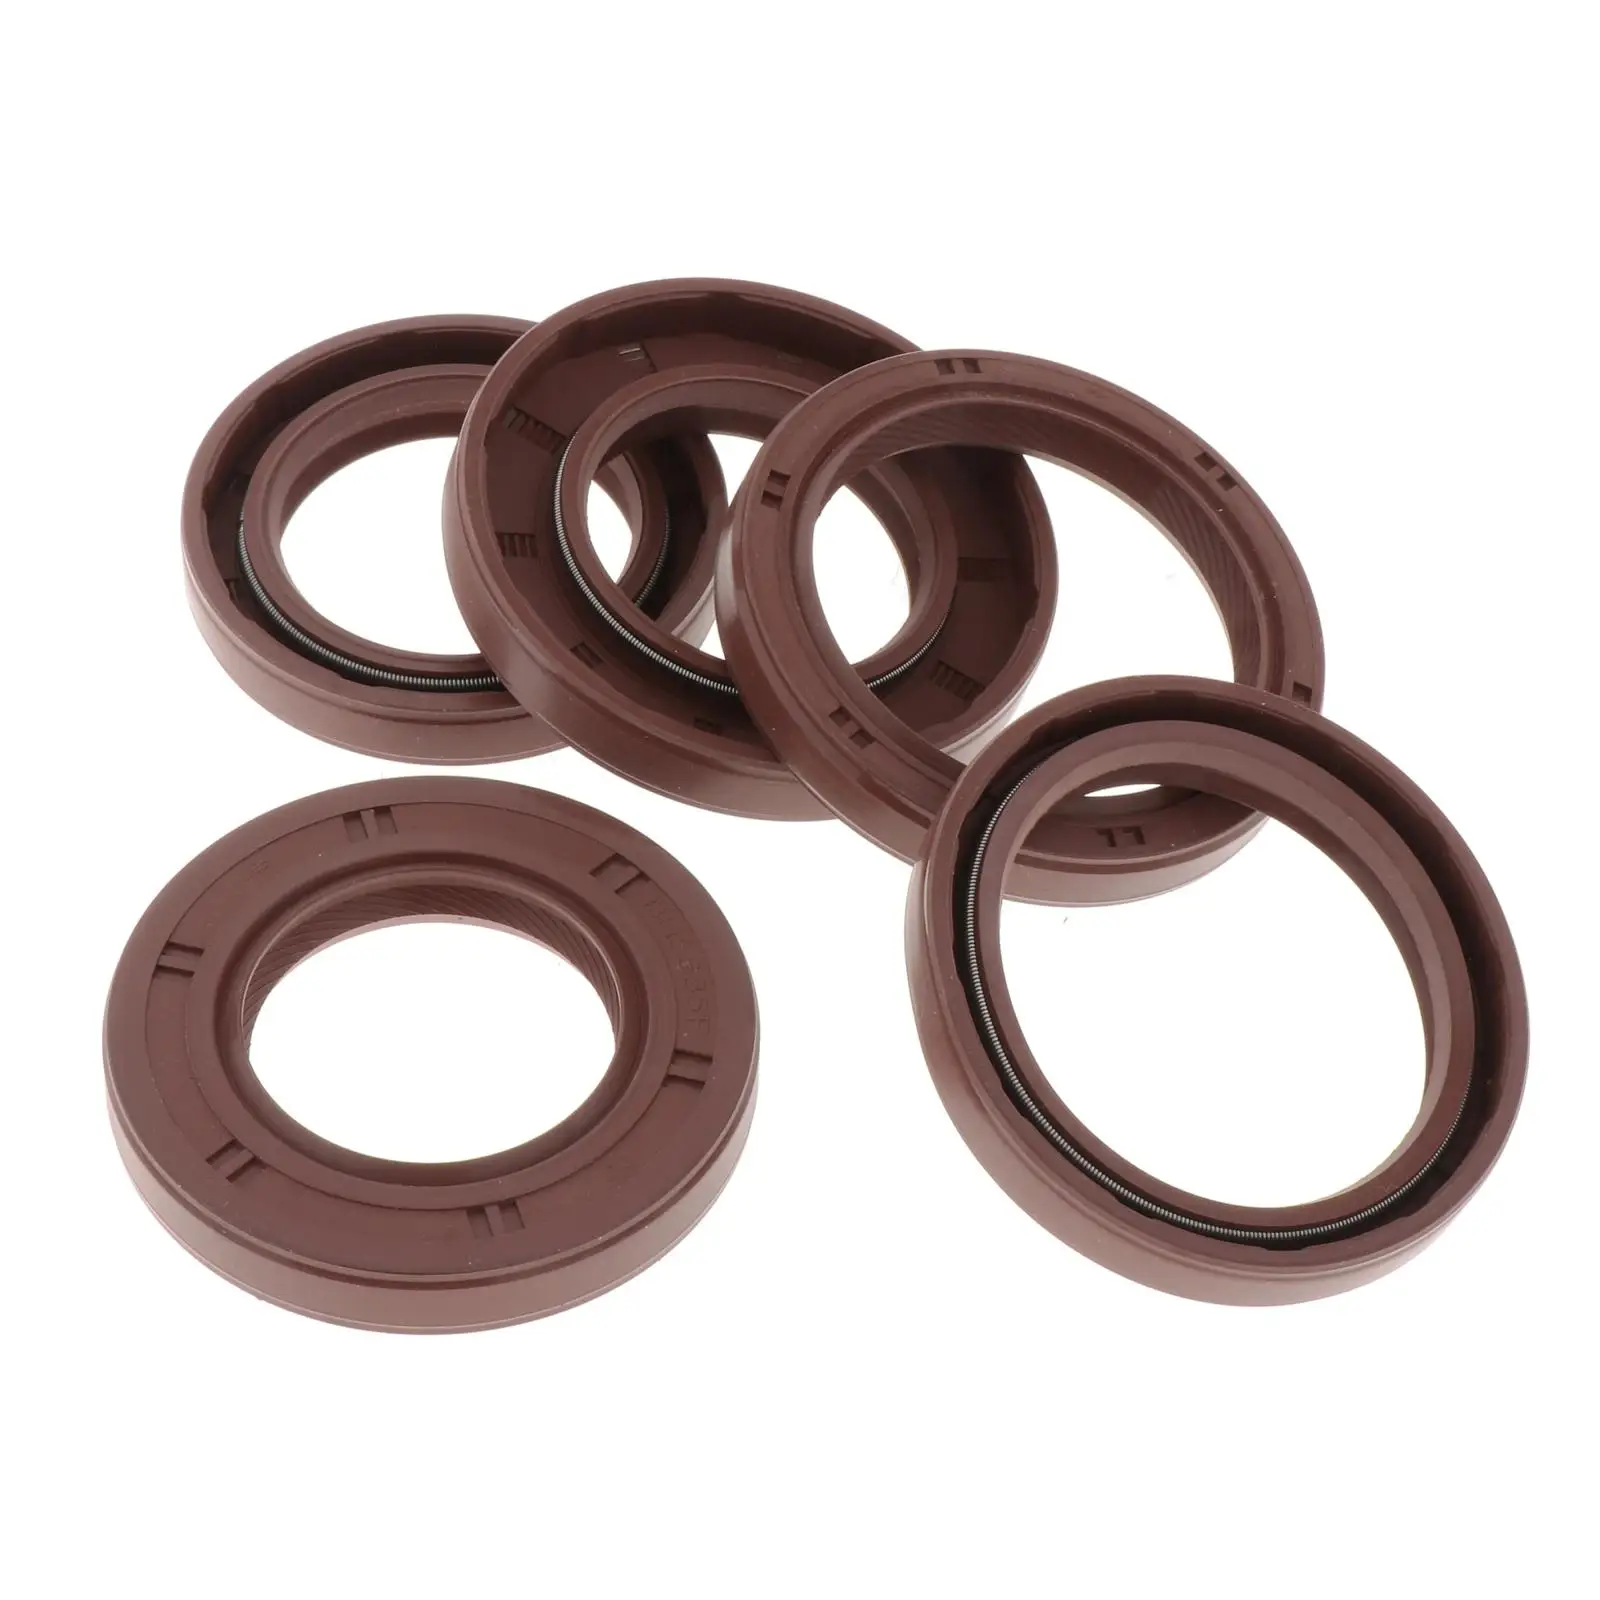 5 Pieces 806732160 Oil Seal Kit Car Supplies for Forester 2004-2013 2.5L